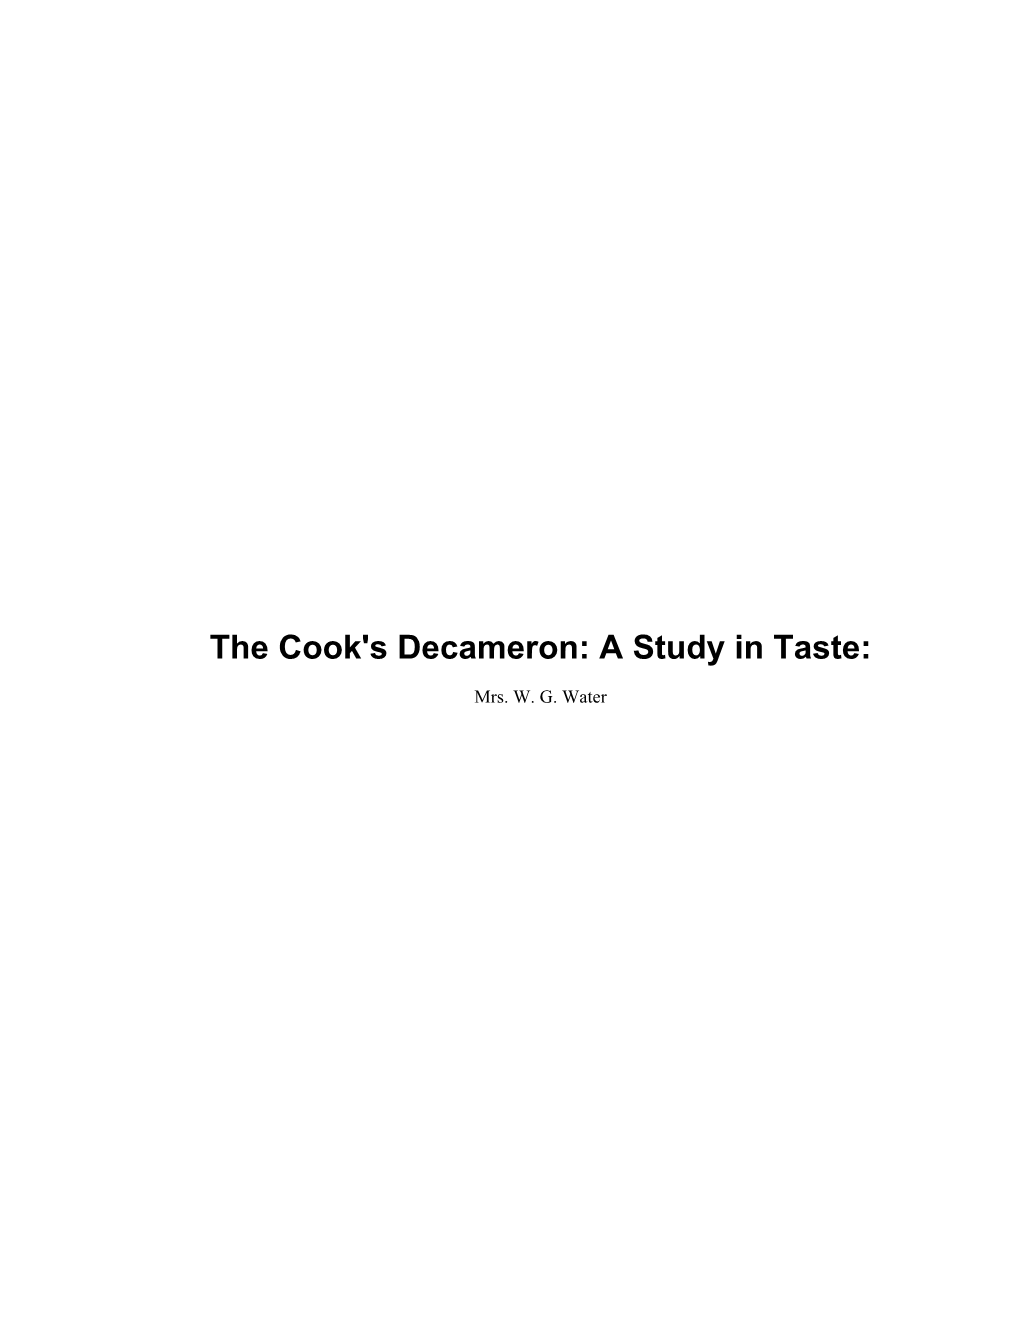 The Cook's Decameron: a Study in Taste